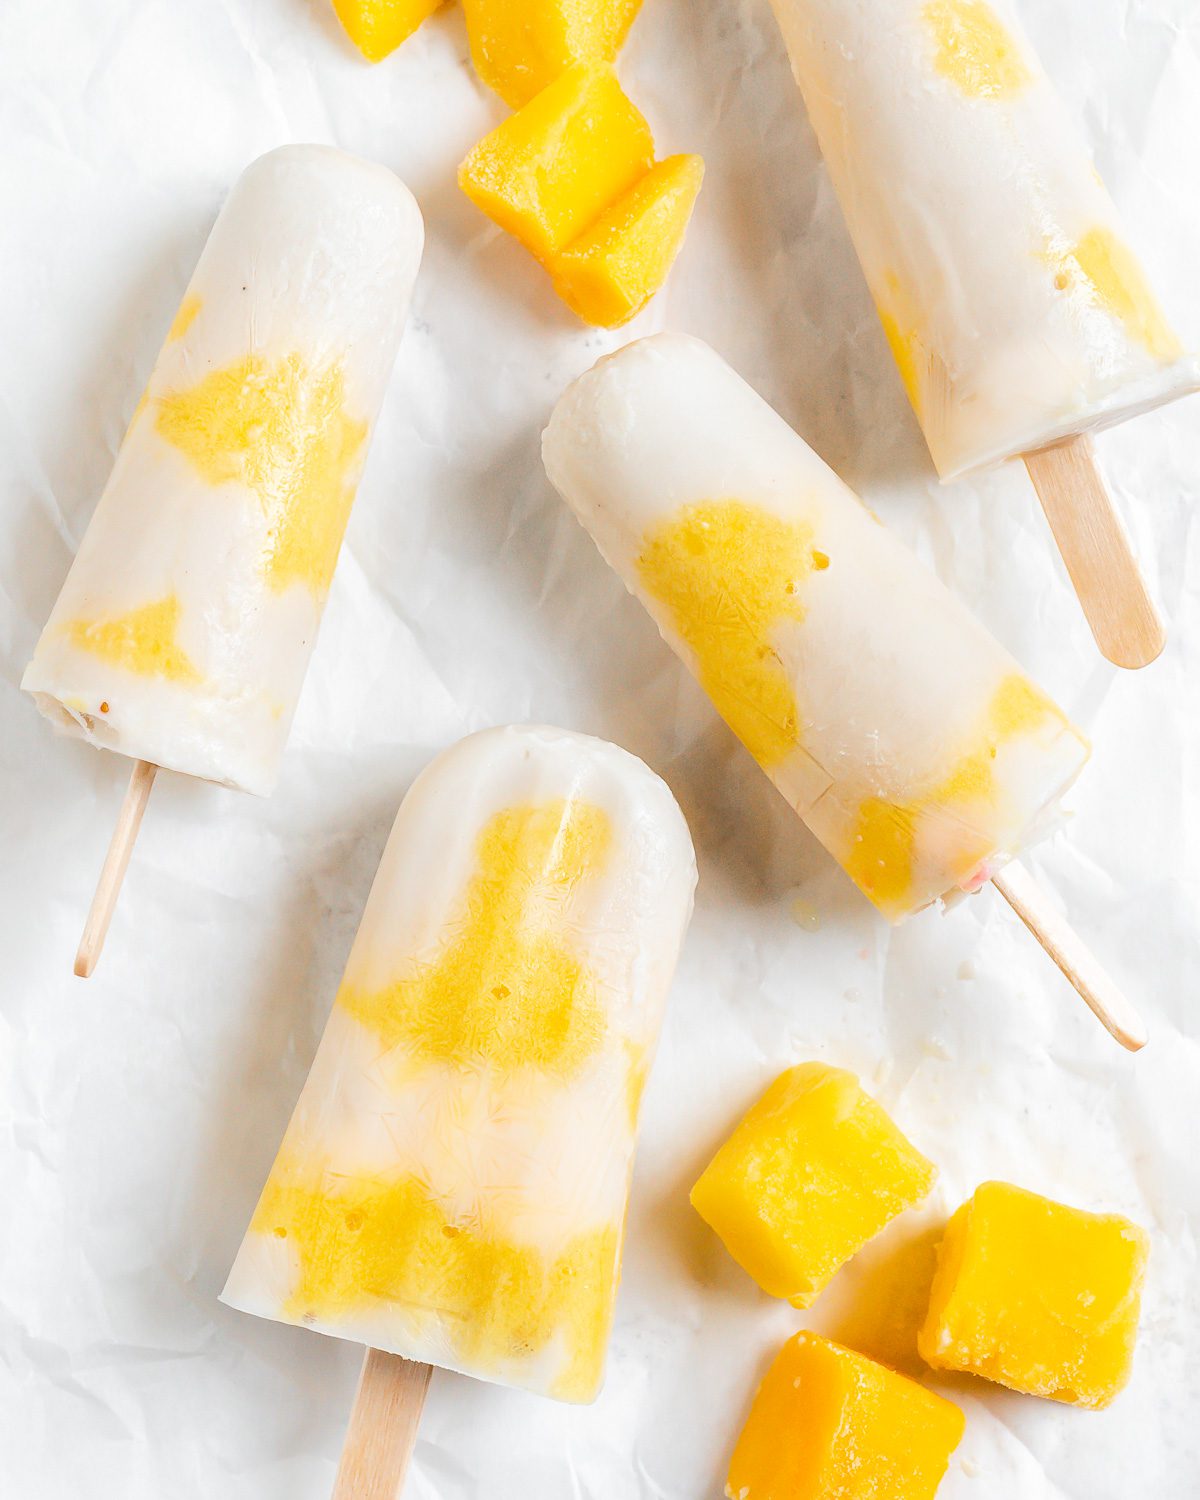 several completed Vegan Mango Popsicles against a white surface